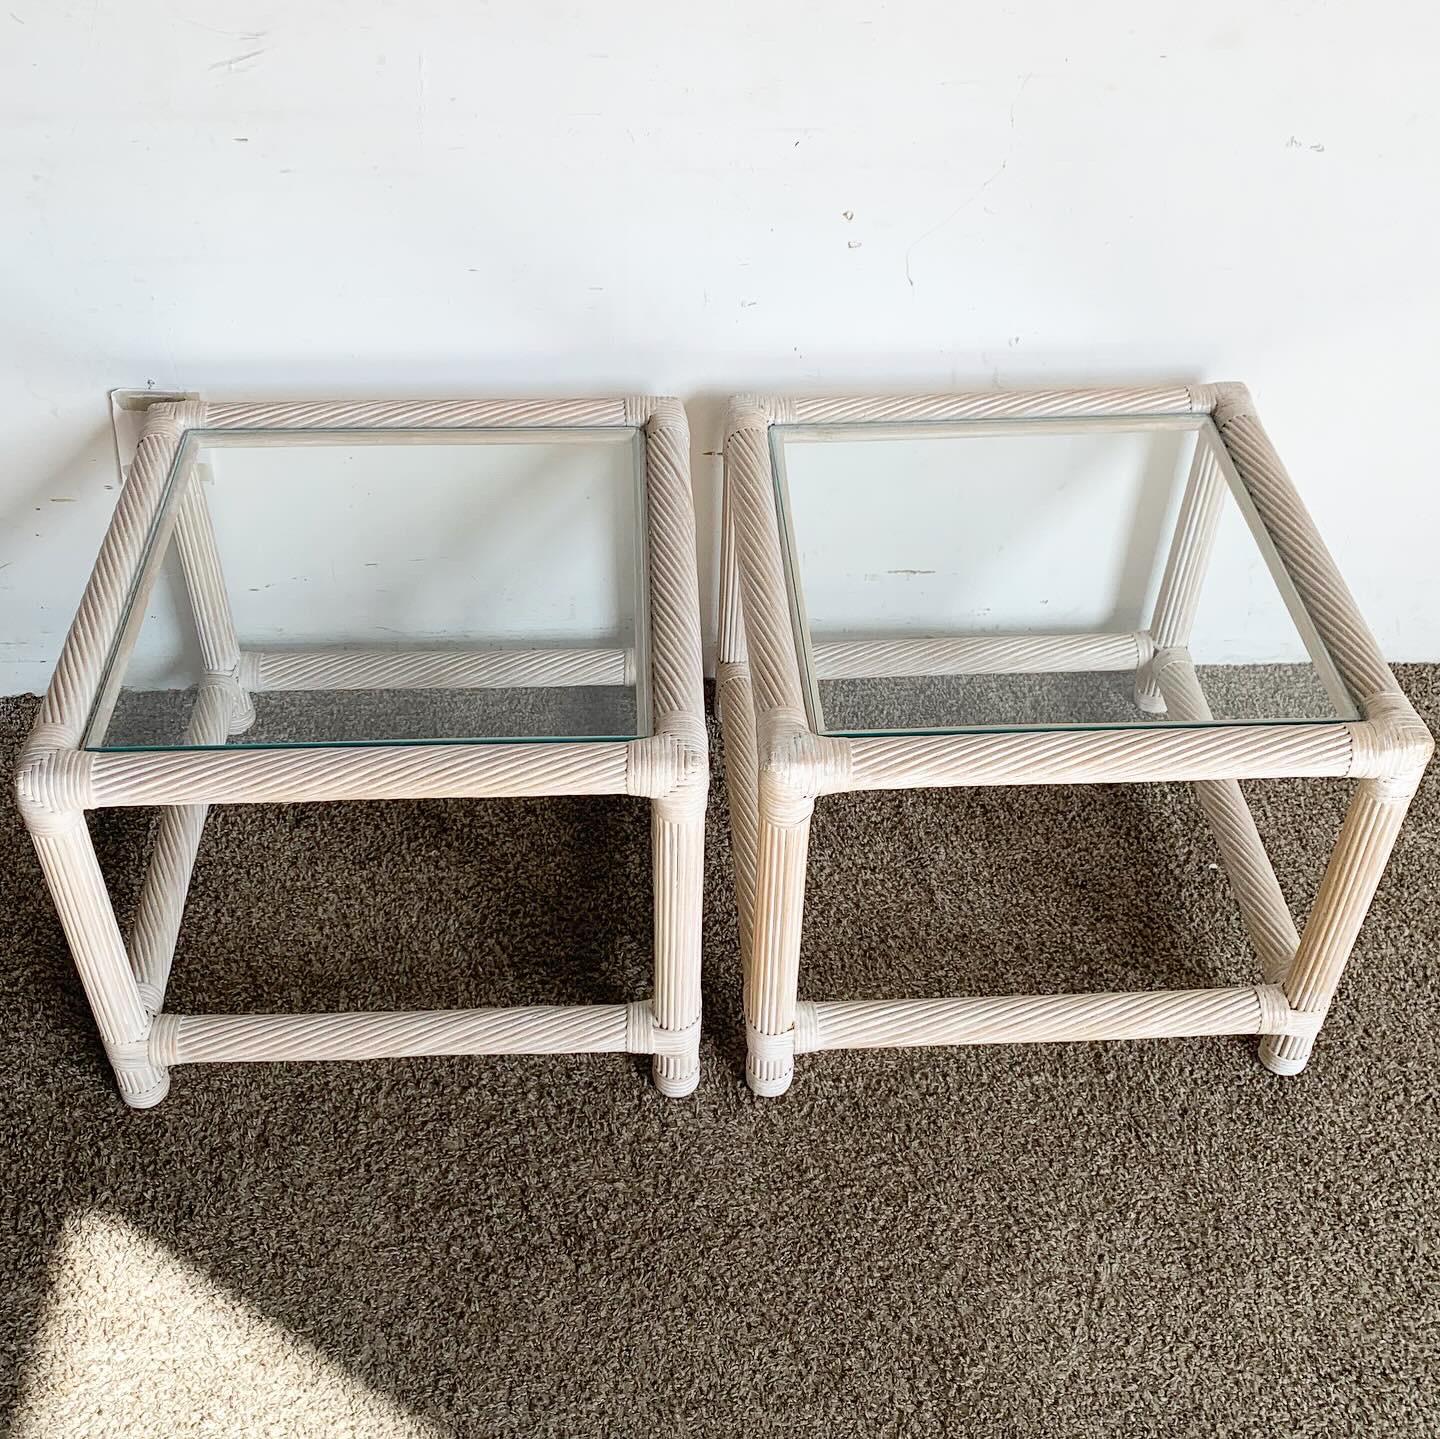 Boho Chic Twisted Pencil Reed and Rattan Side Tables - a Pair In Good Condition For Sale In Delray Beach, FL